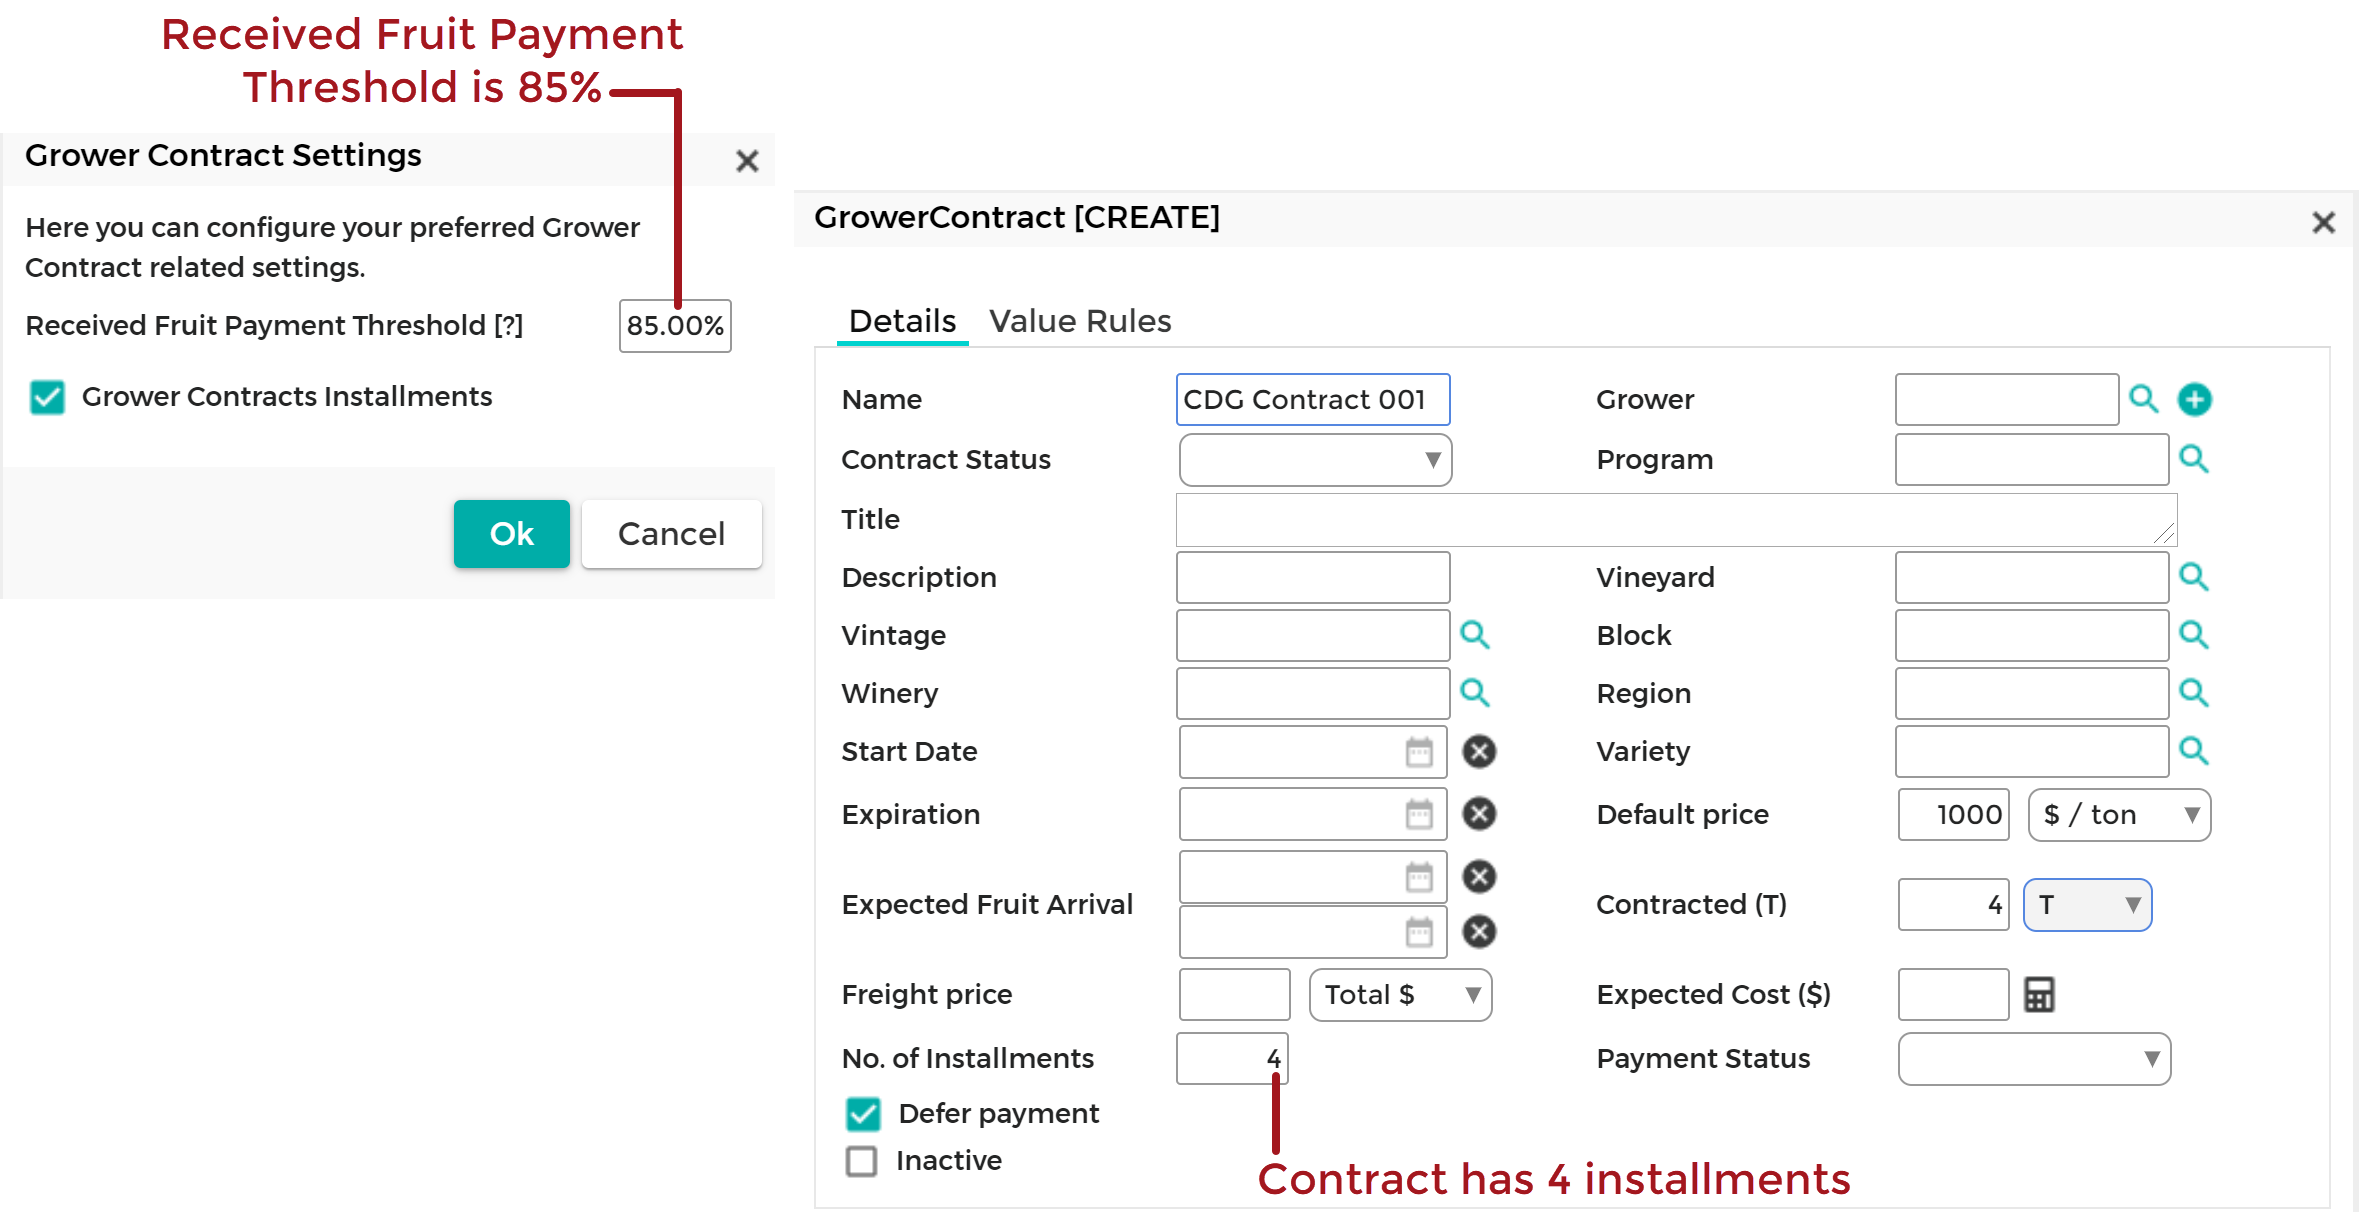 Example_Contract_Installments_20200416.png